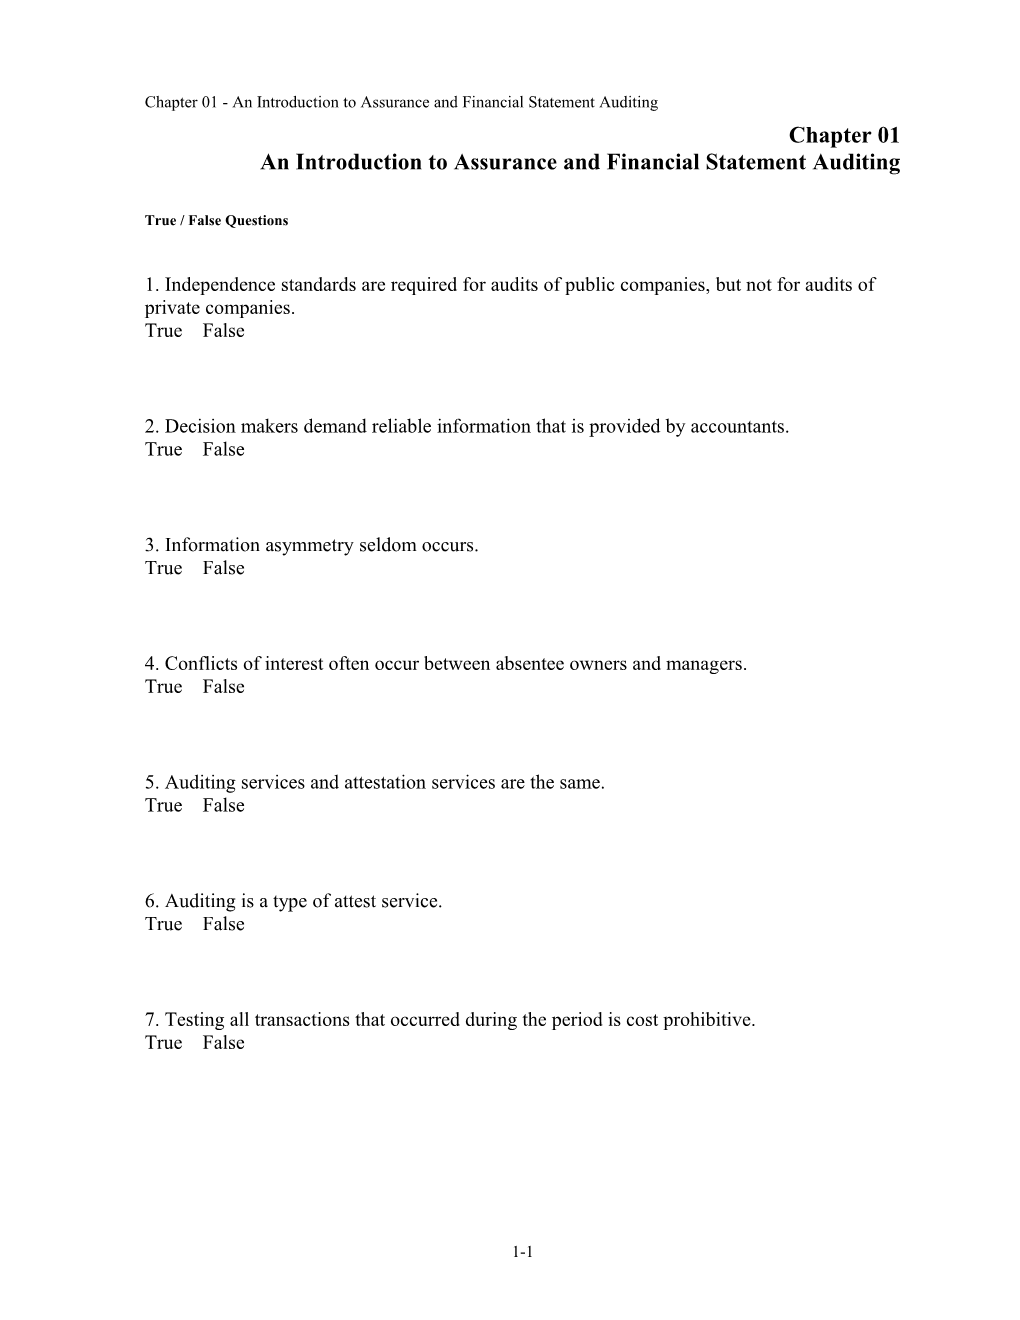 Chapter 01 an Introduction to Assurance and Financial Statement Auditing